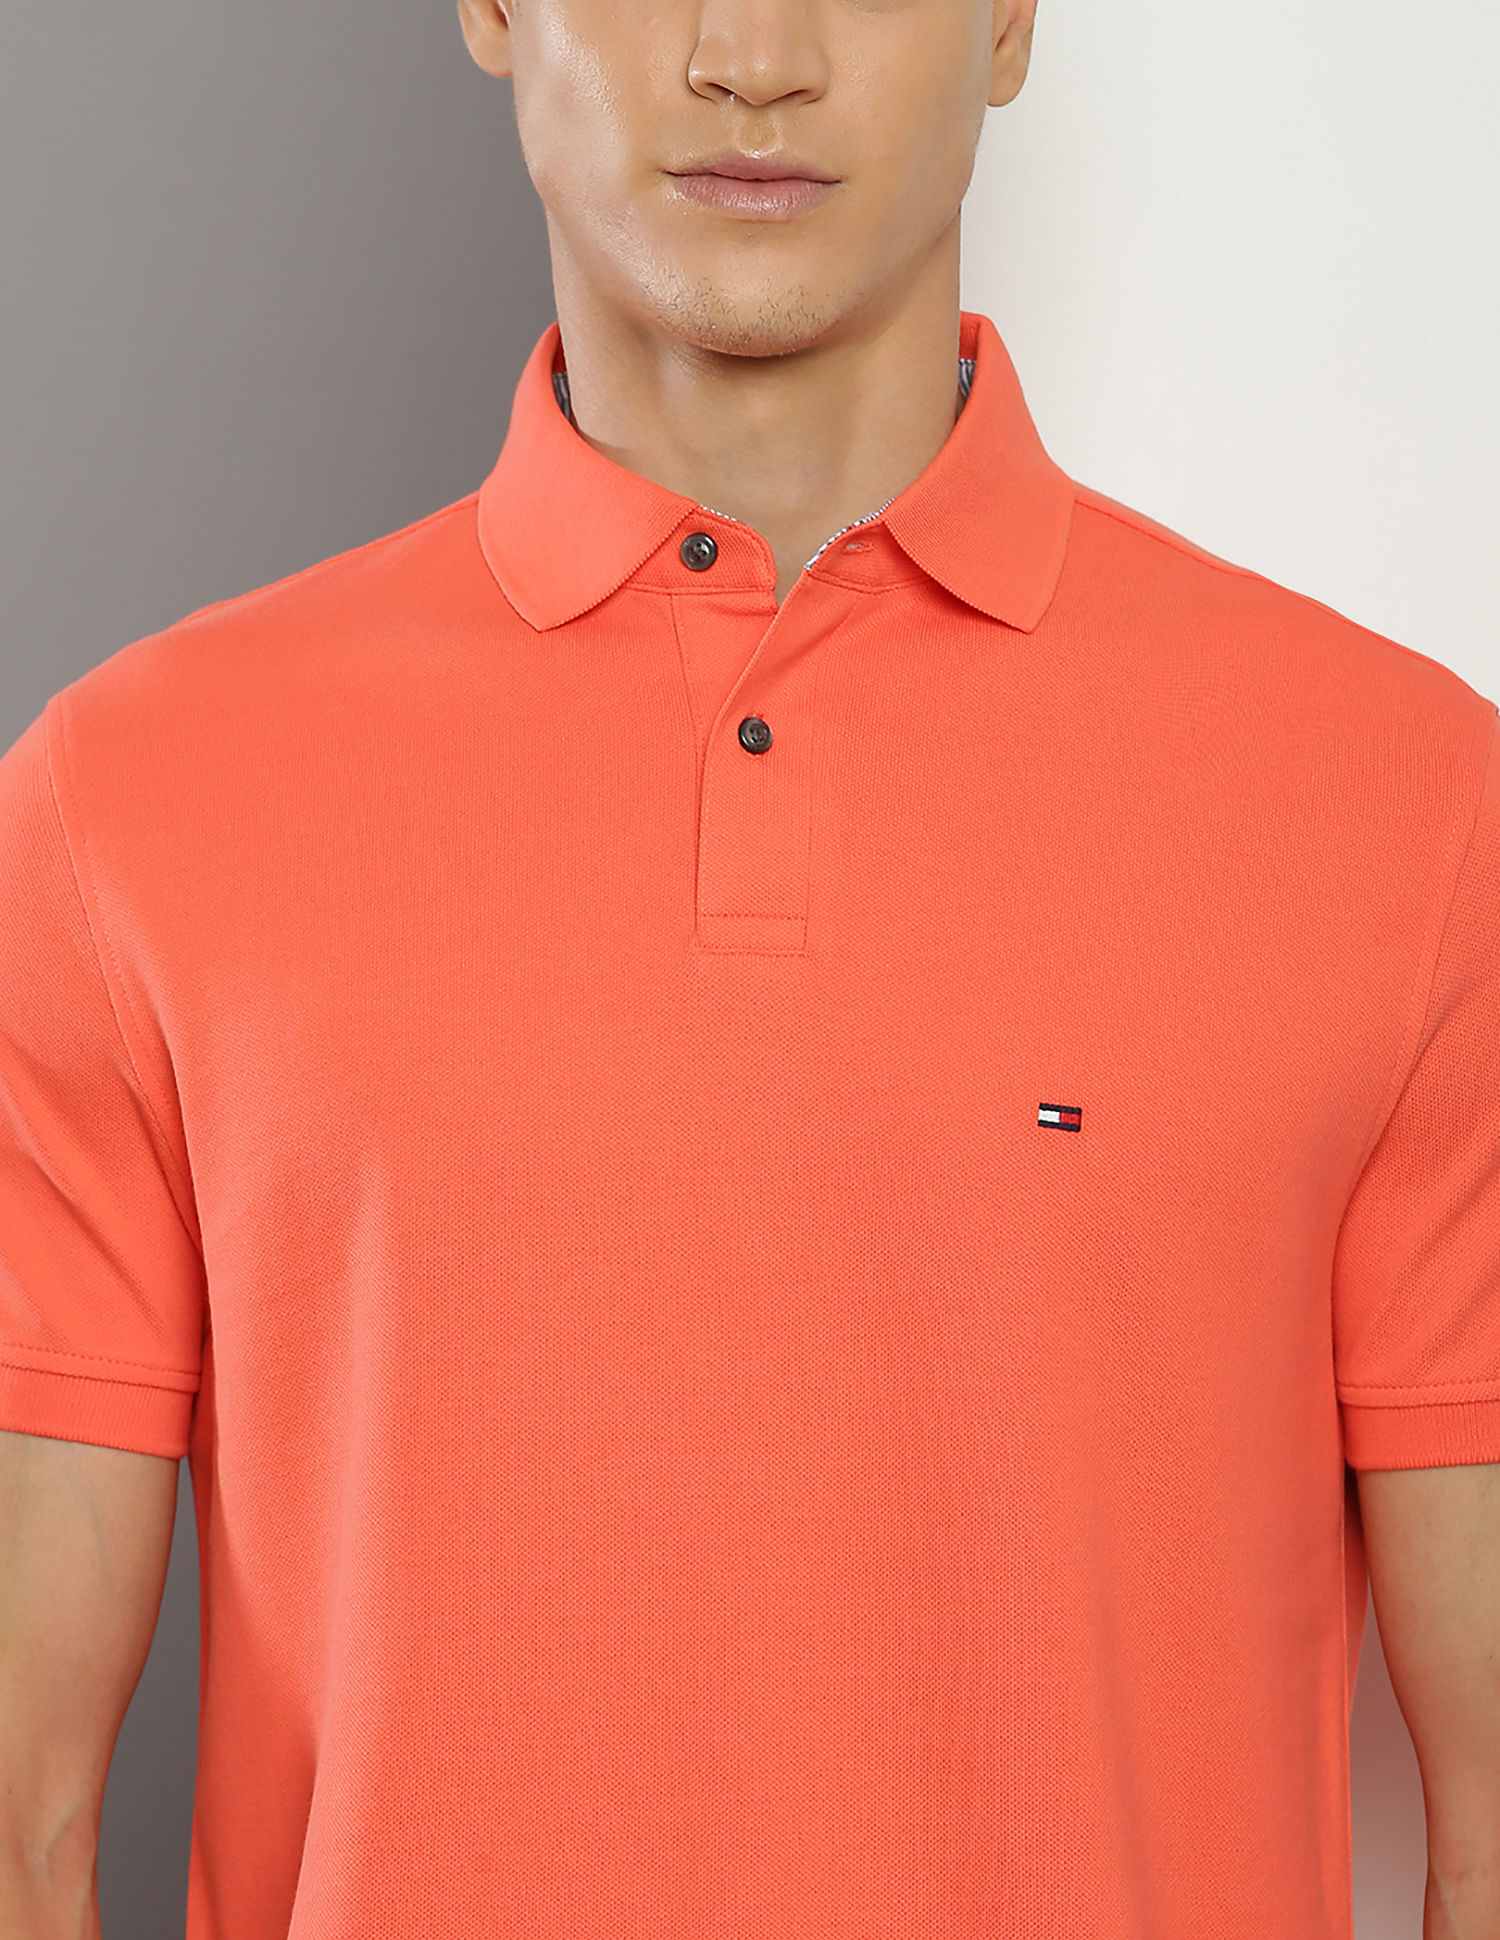 Tommy 1985 Cotton Organic Hilfiger Solid Shirt Buy Polo